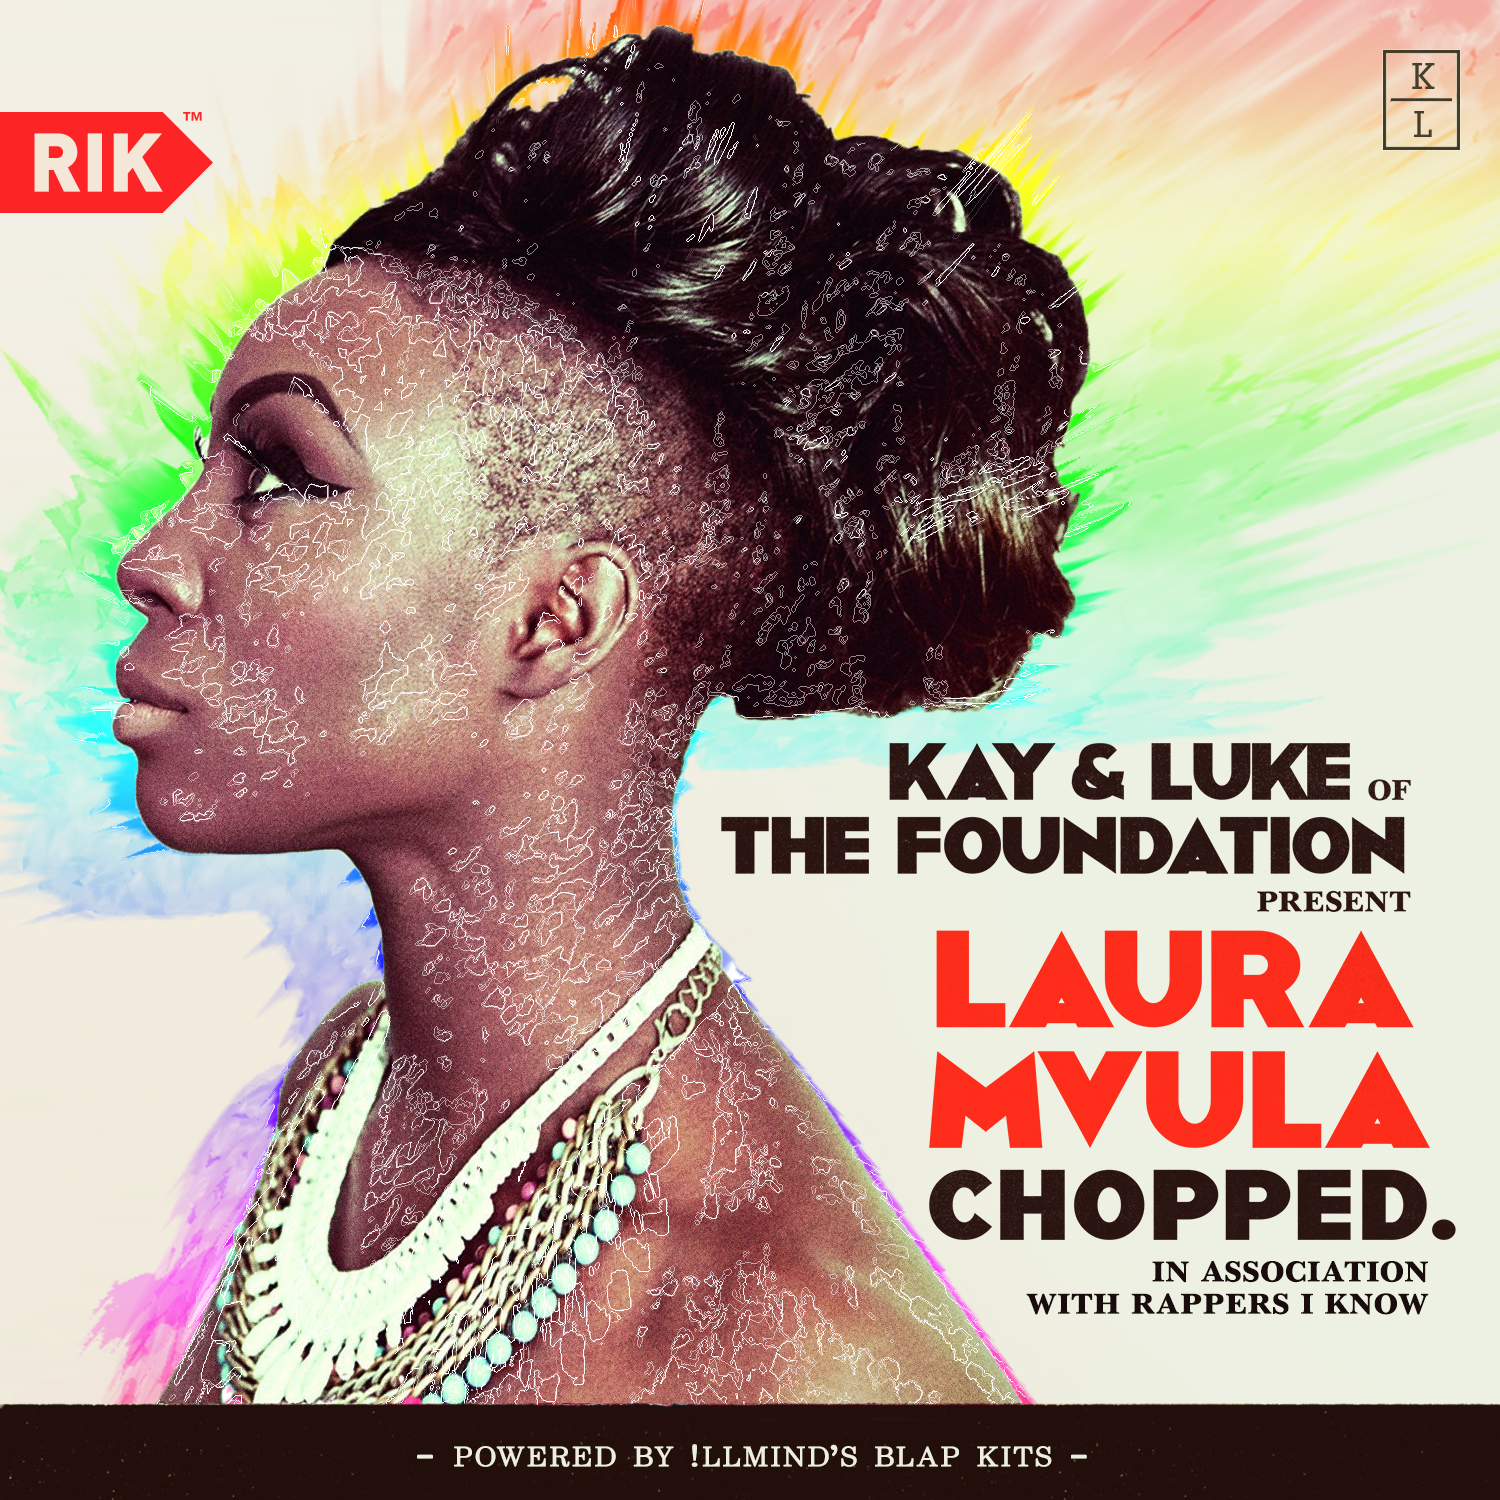 Announcing: <br>Kay & Luke (of The Foundation) — Laura Mvula Chopped.